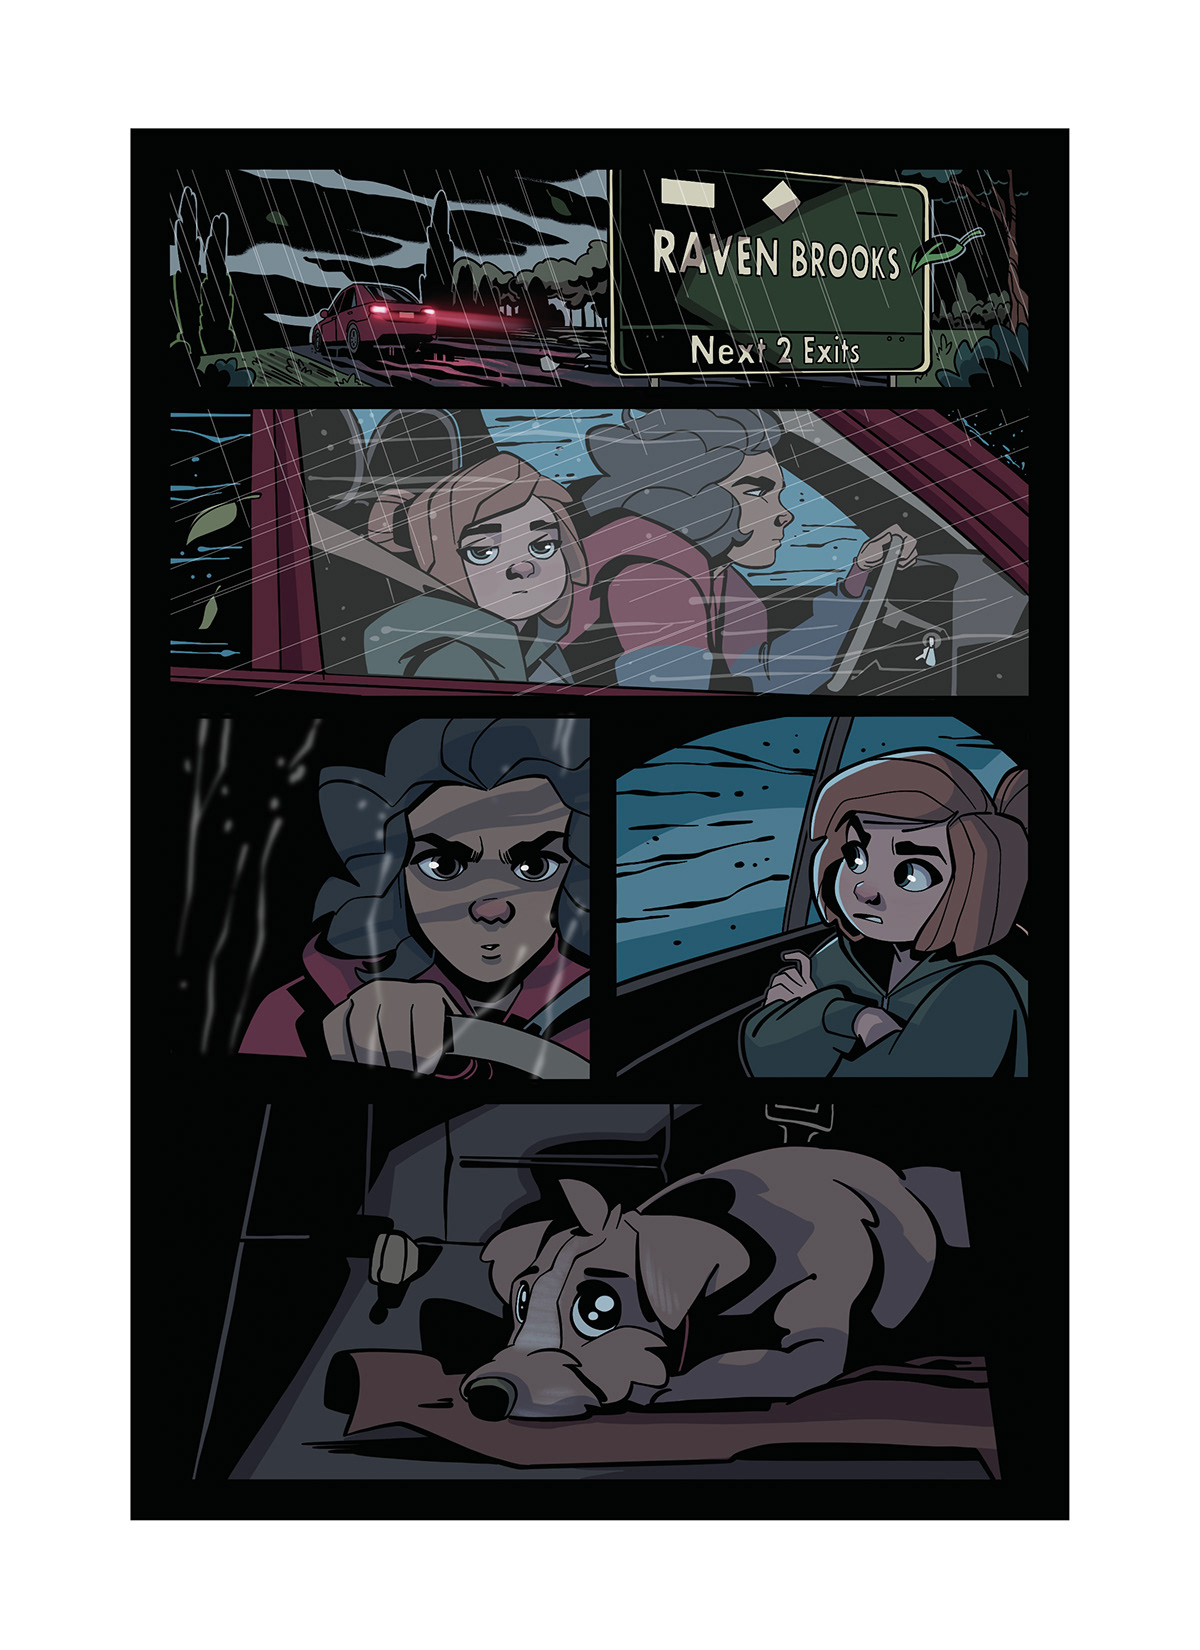 Pris and Regina drive out of town and through the rain while Flan, their dog, rests in the backseat.